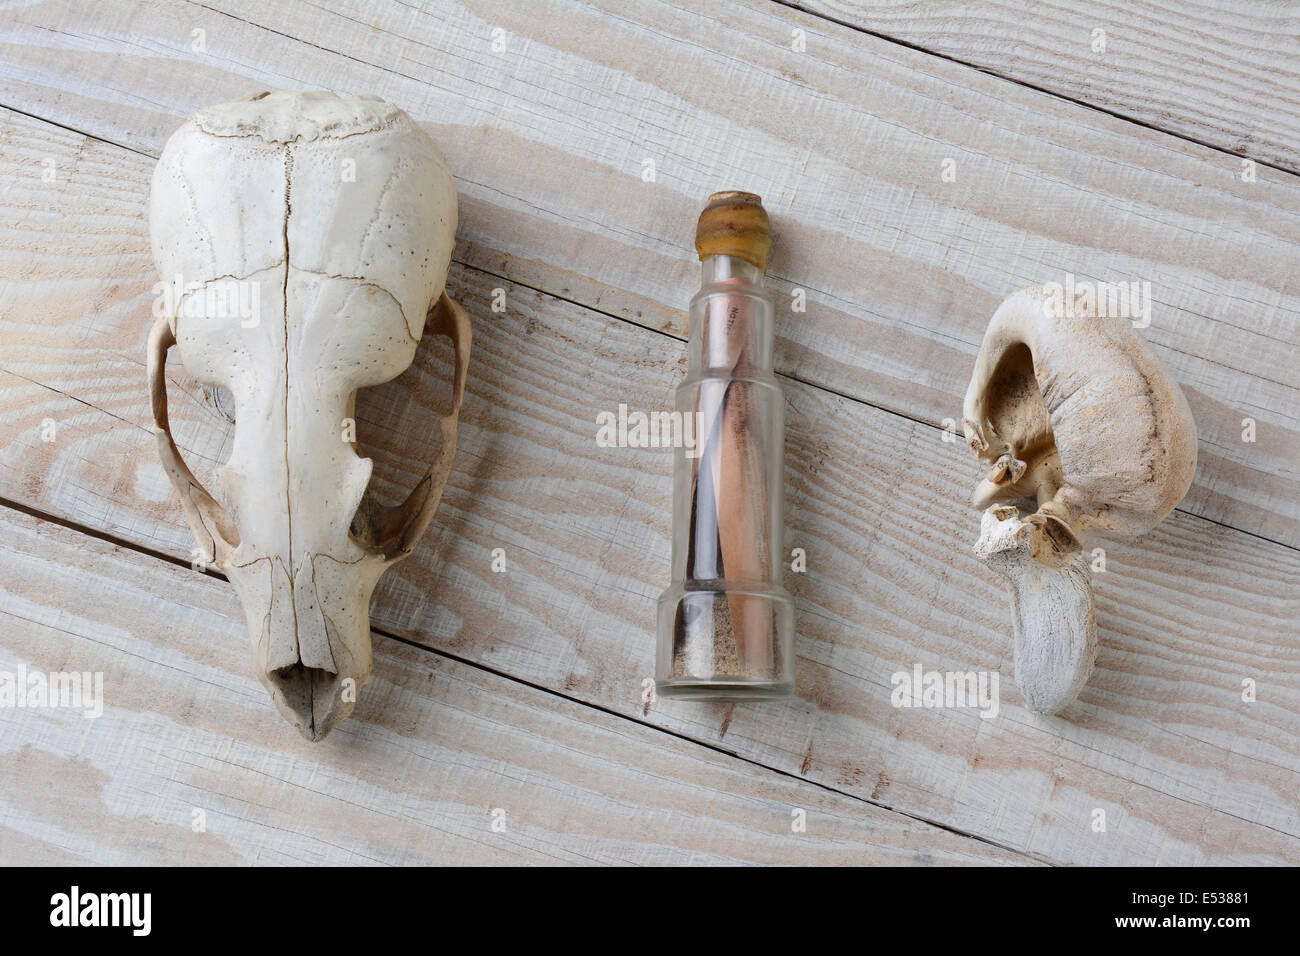 Items found while beach combing in a remote area. A sea lion skull, a whale inner ear bone and a note in a bottle. The items are Stock Photo